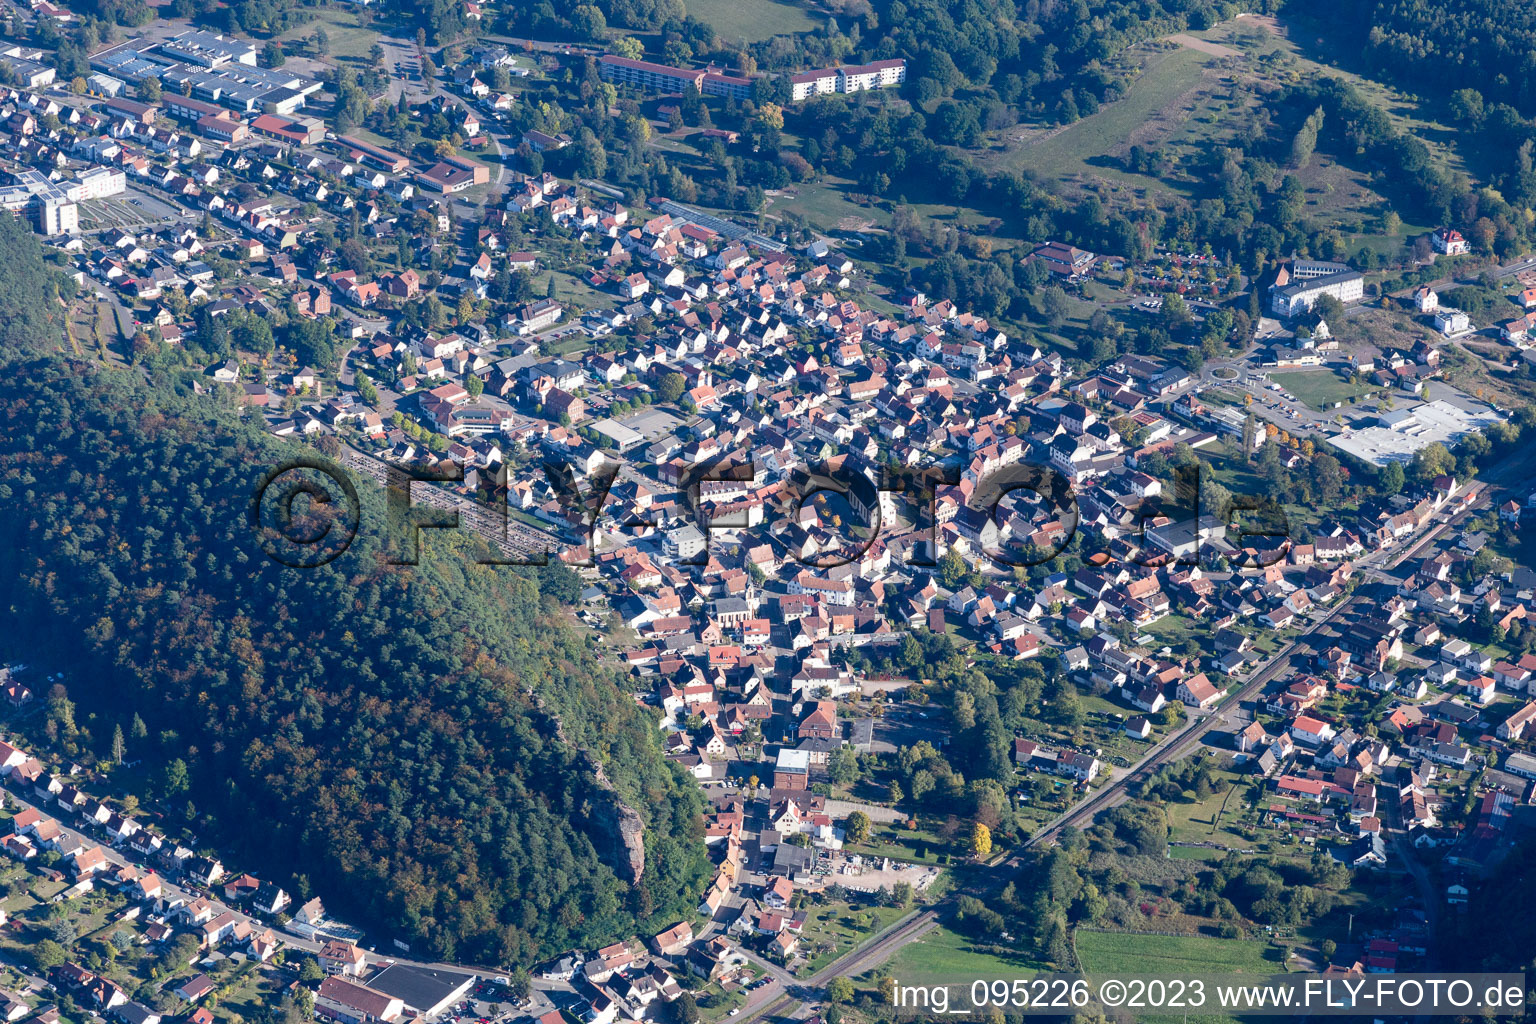 Dahn in the state Rhineland-Palatinate, Germany out of the air